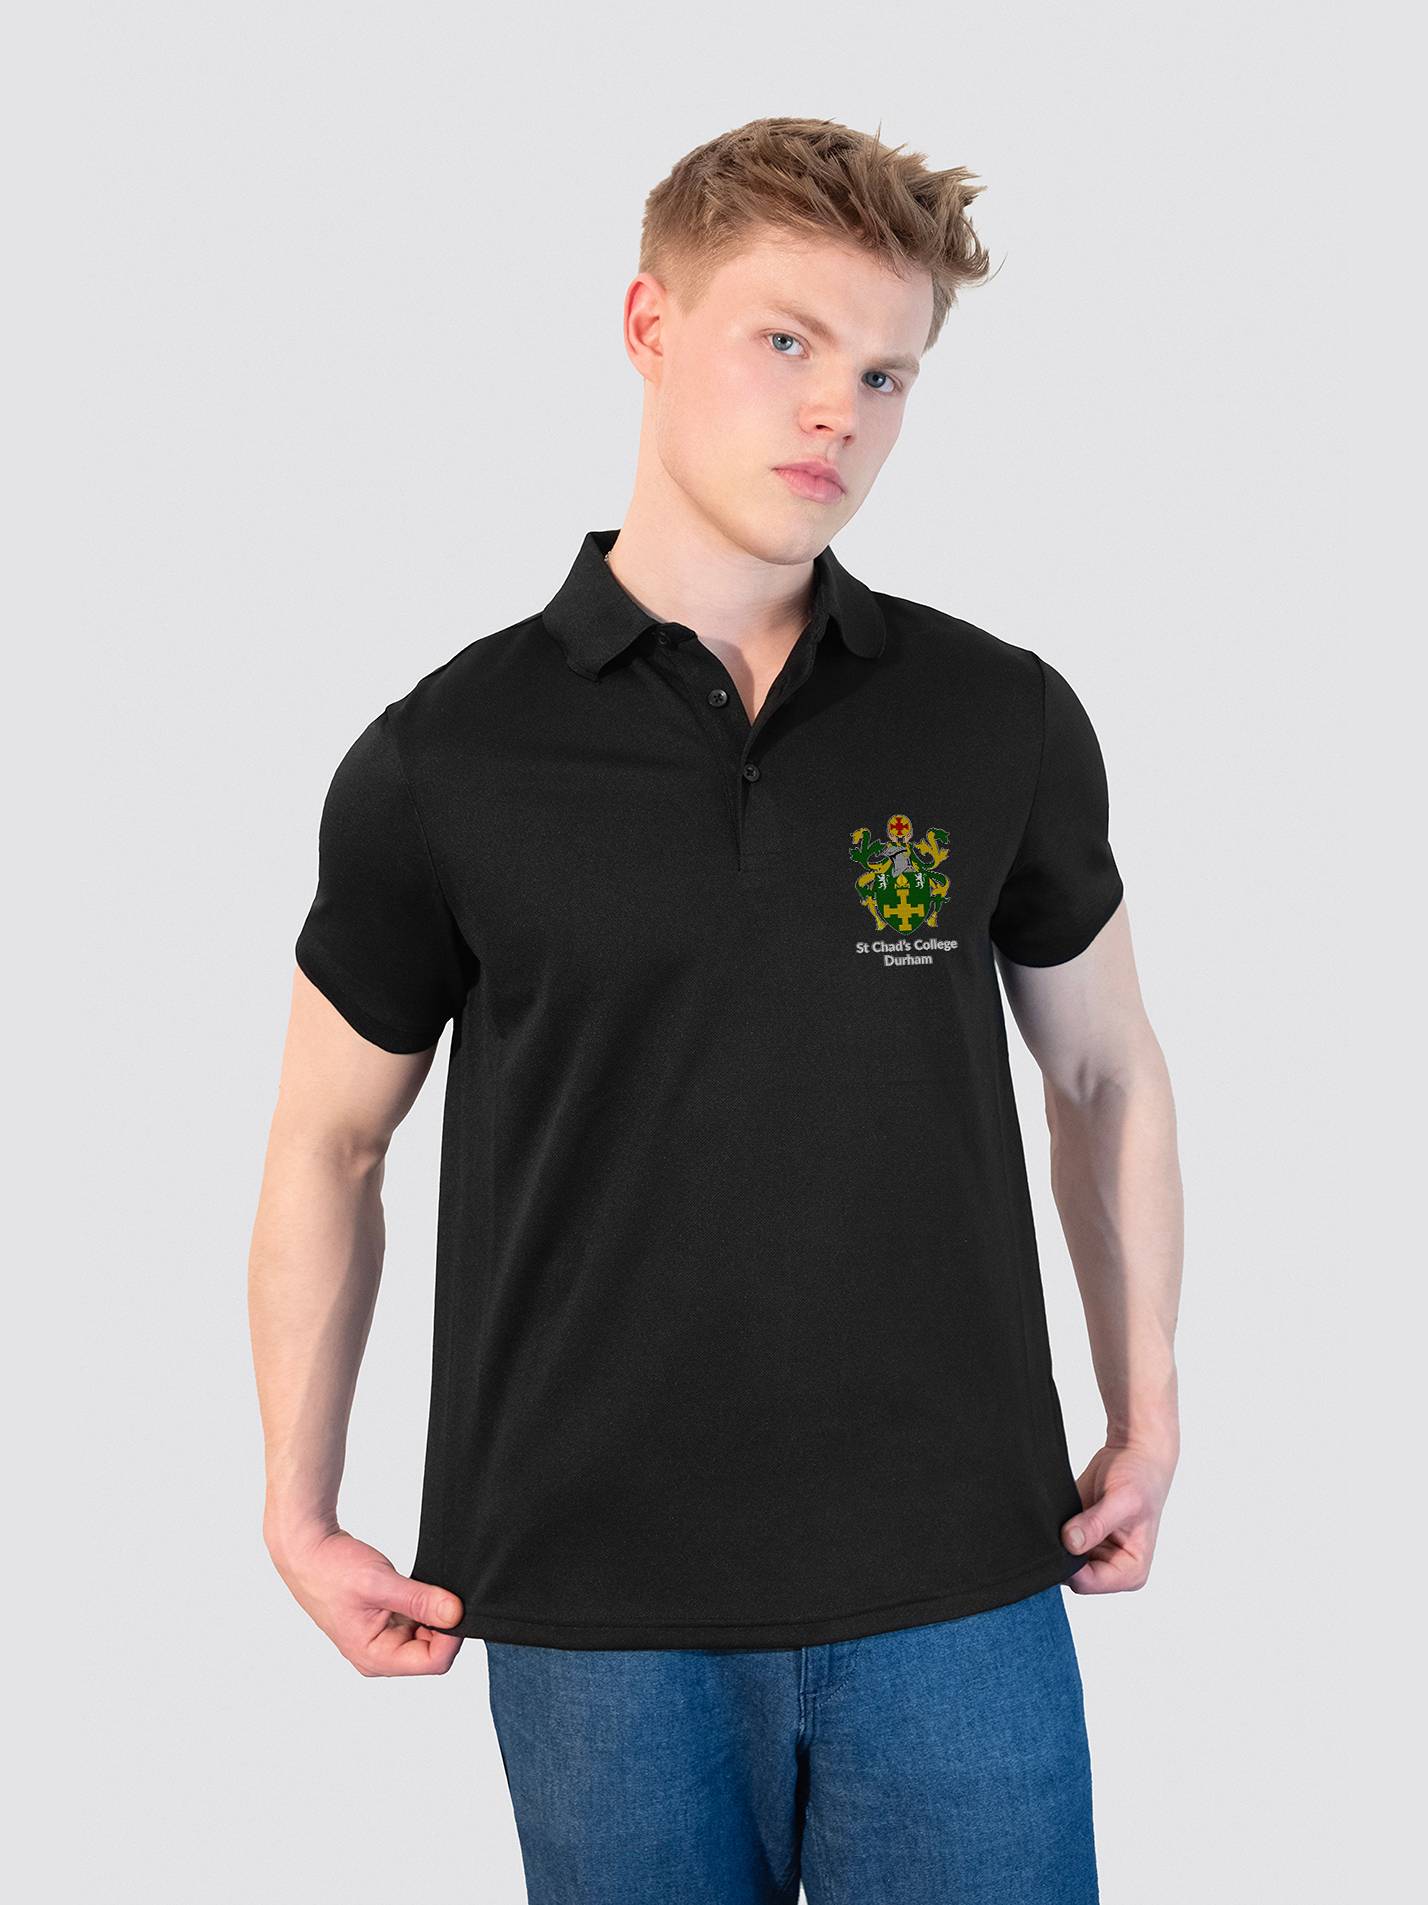 St Chad's College Durham MCR Sustainable Men's Polo Shirt